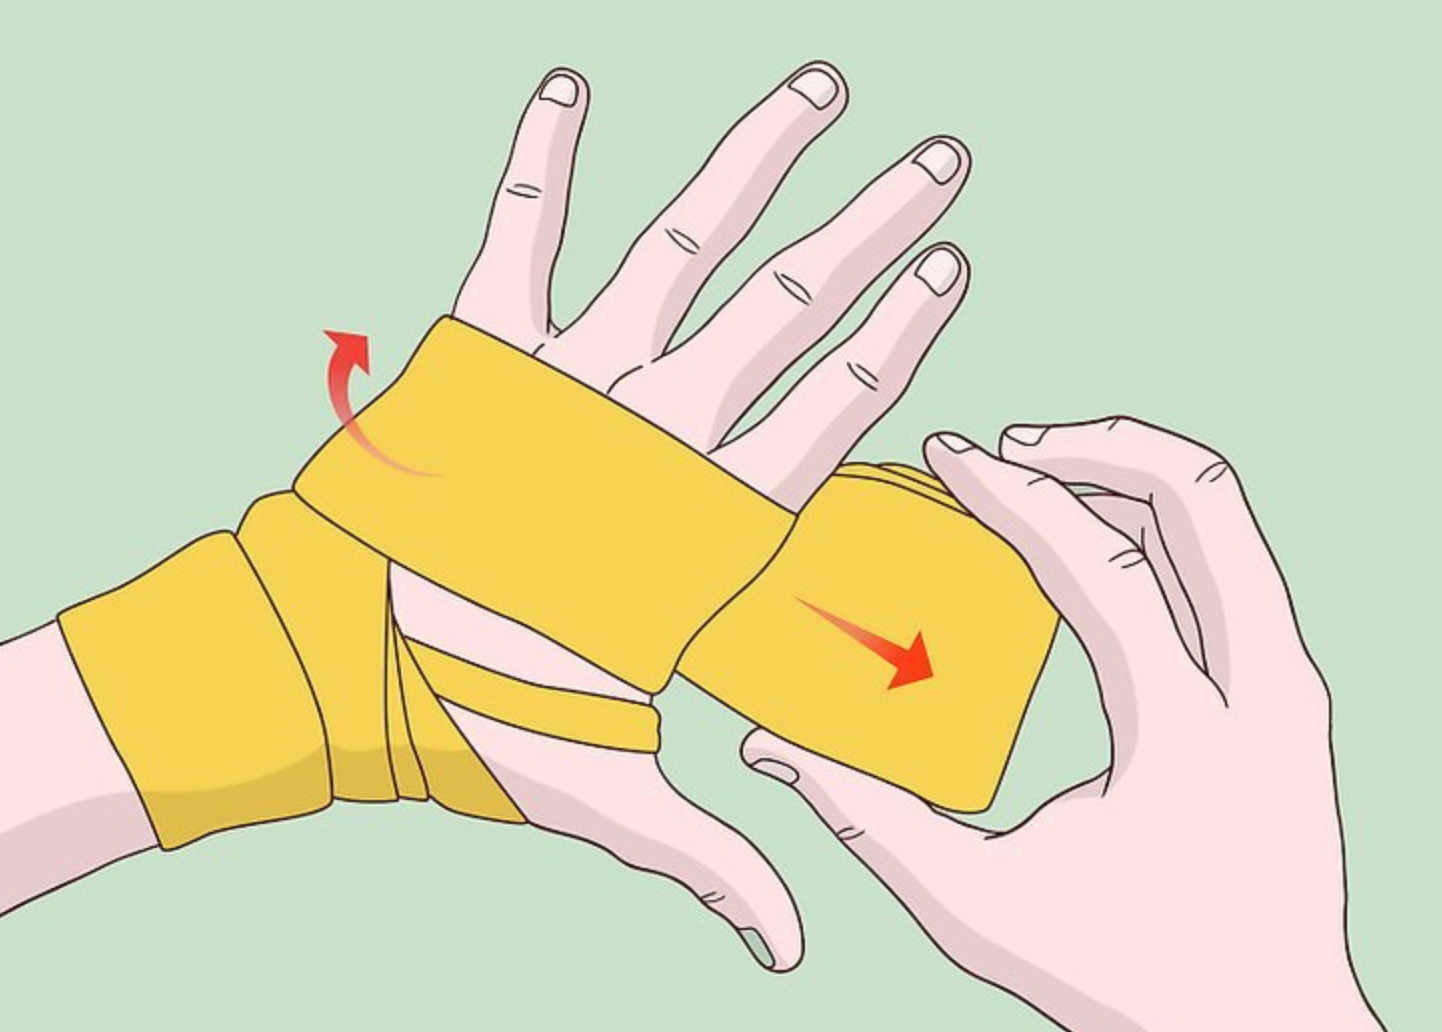 Wrapping your hand.